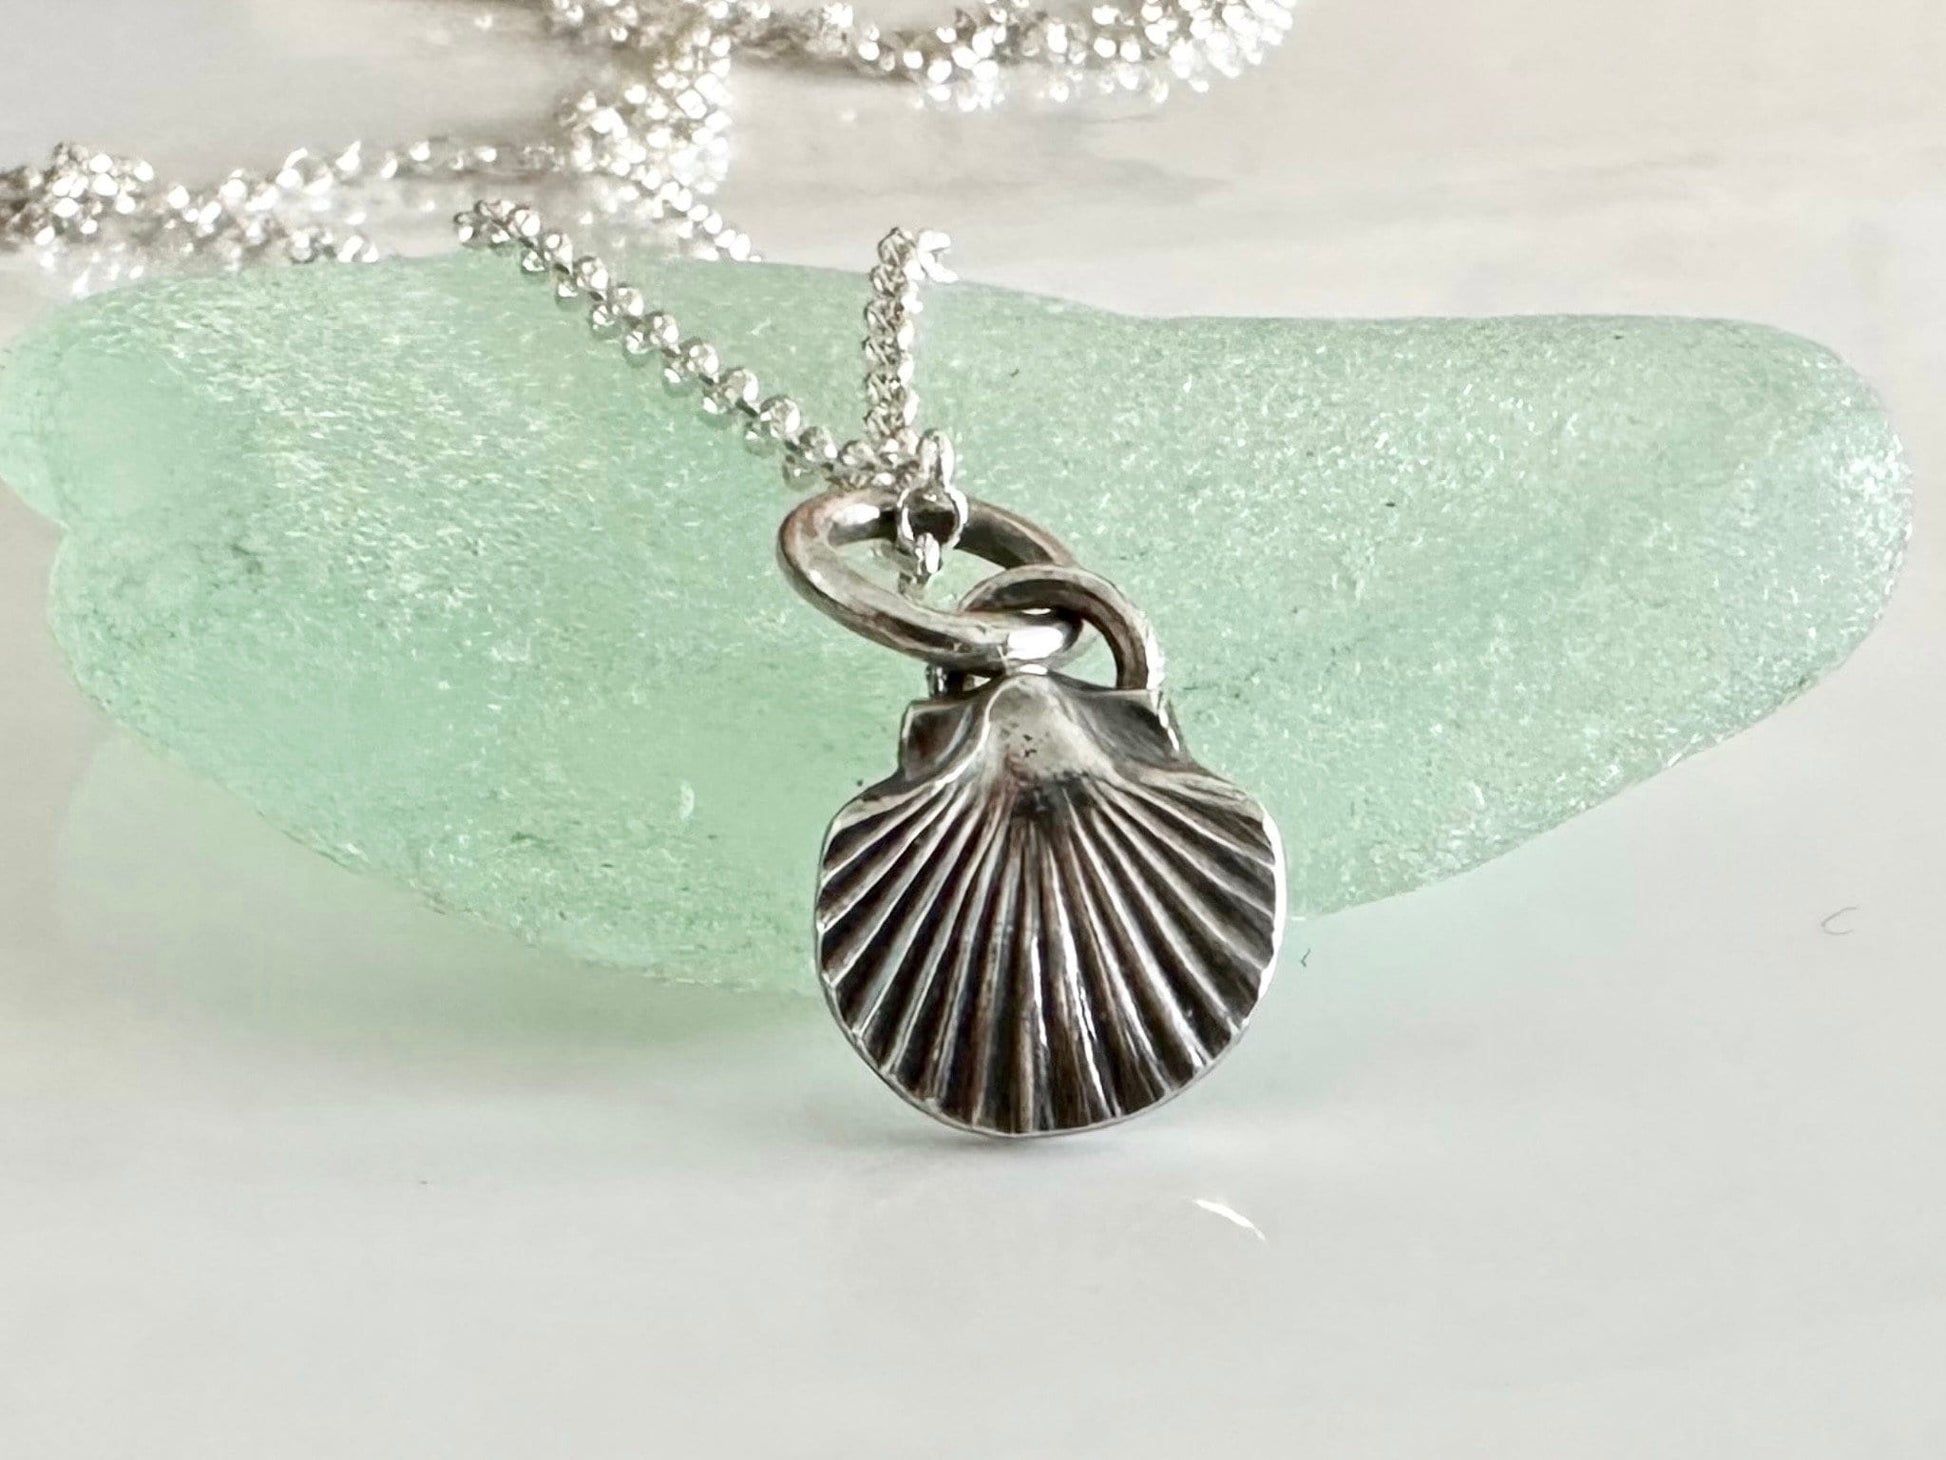 Rustic Sterling Silver Scallop Seashell pendant charm necklace, handmade from recycled 925 Sterling Silver, made to order